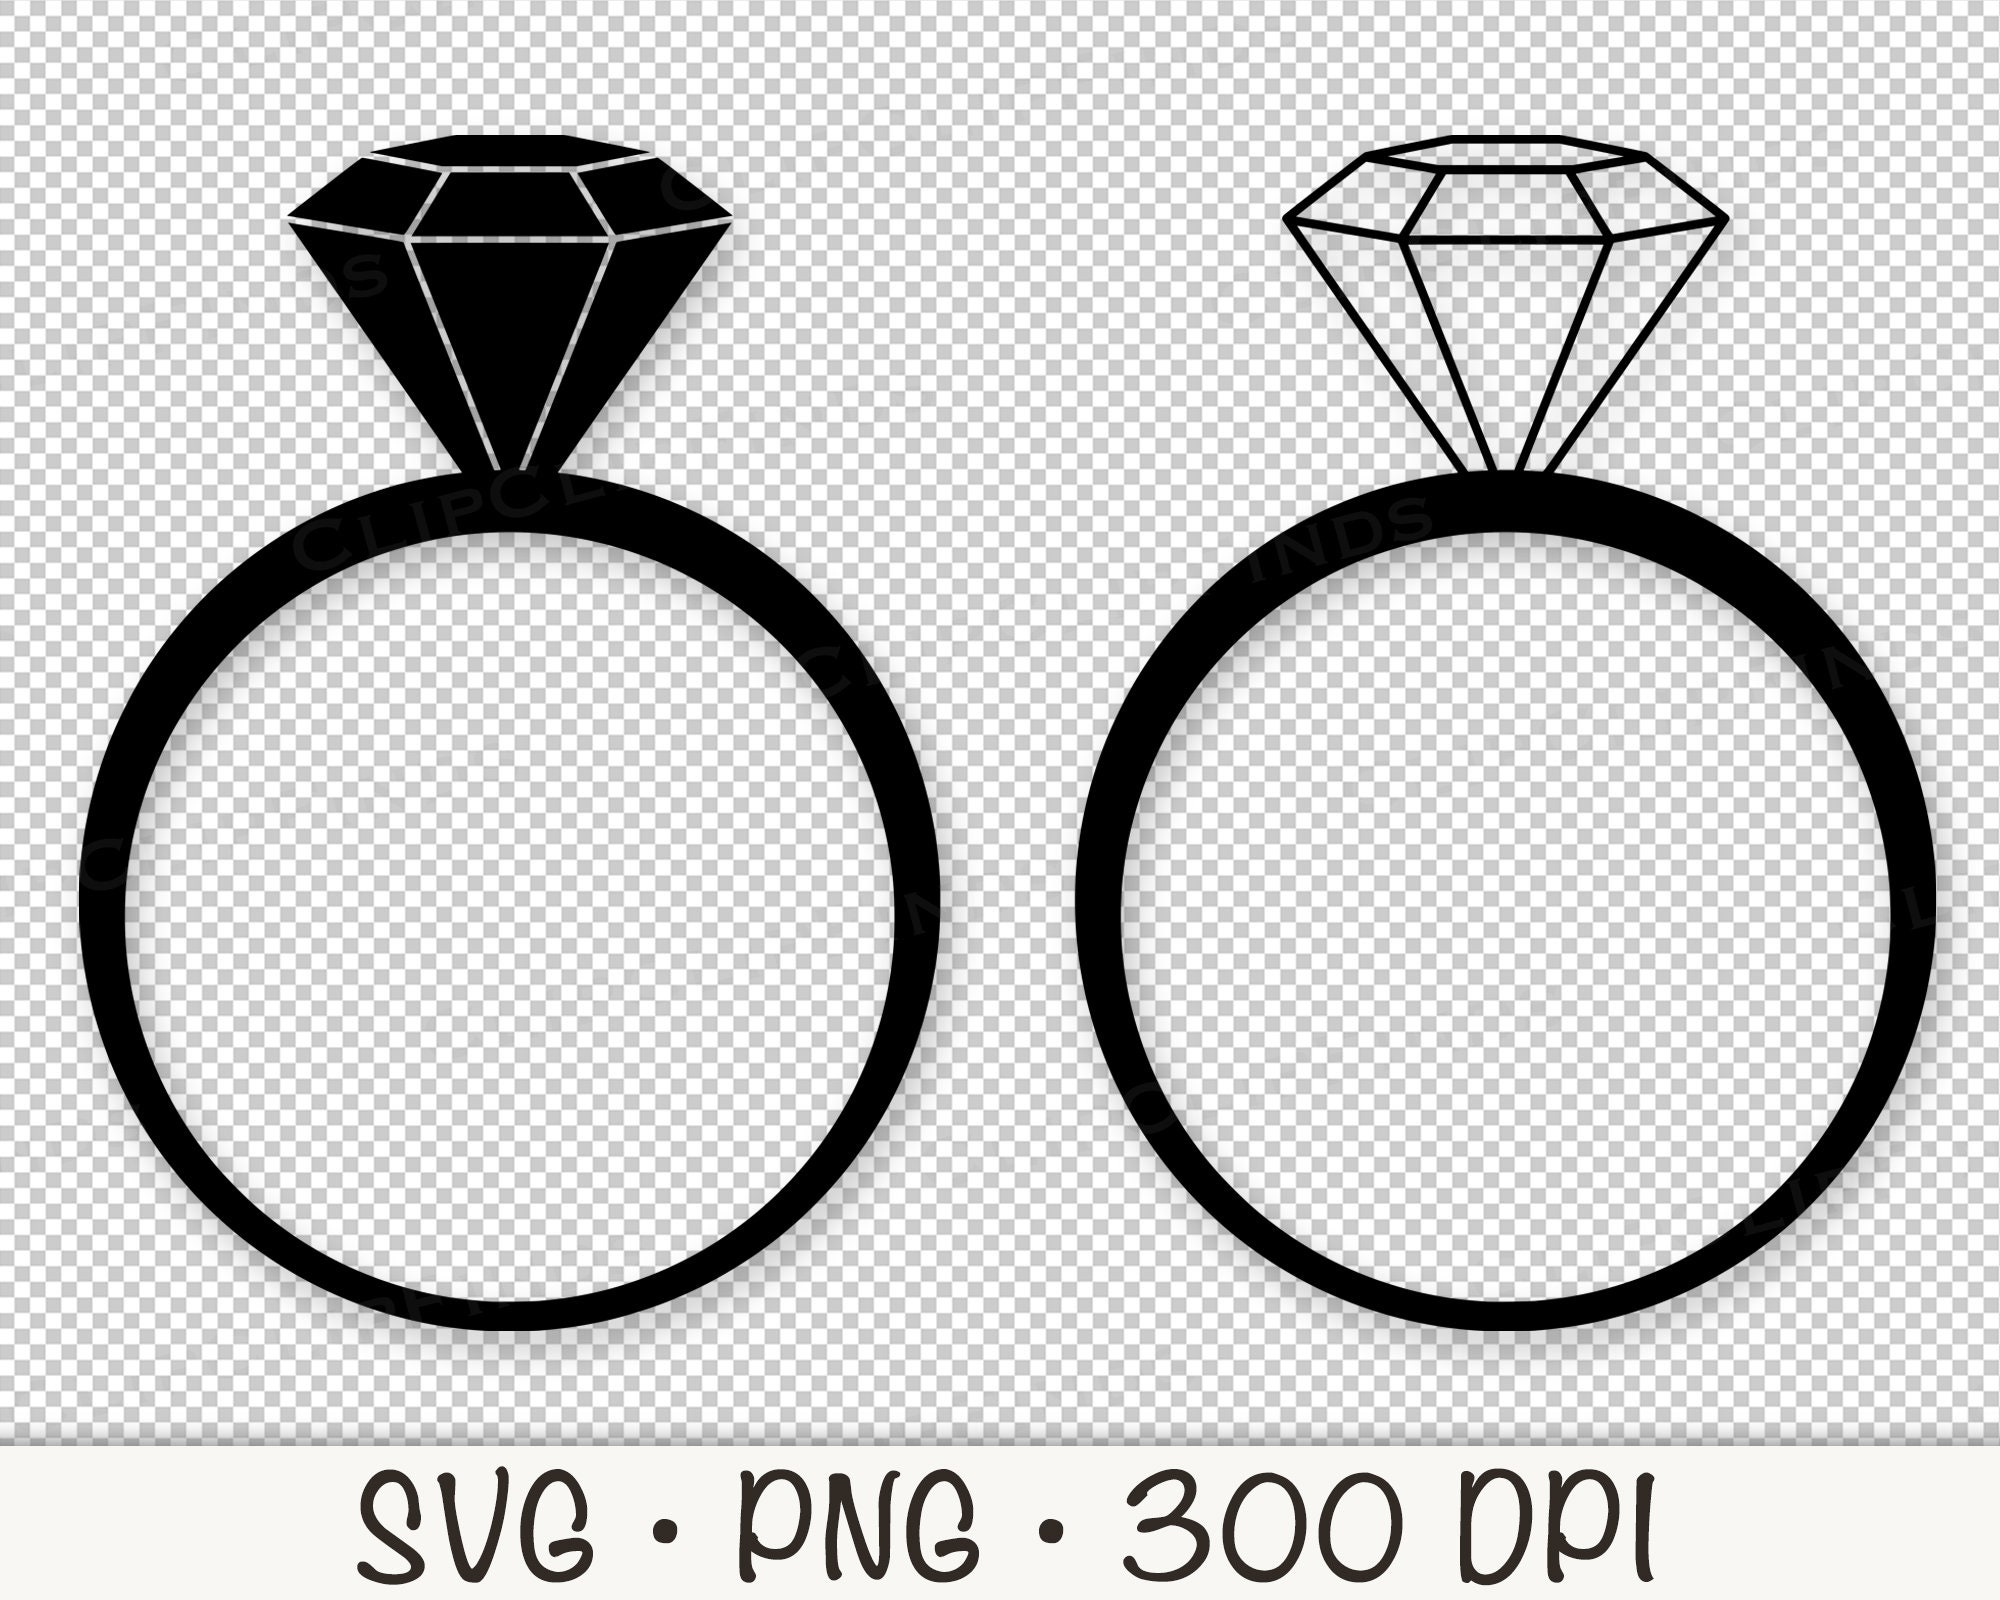 Free: Full Size Of Wedding - Ring Clipart Black And White Png - nohat.cc